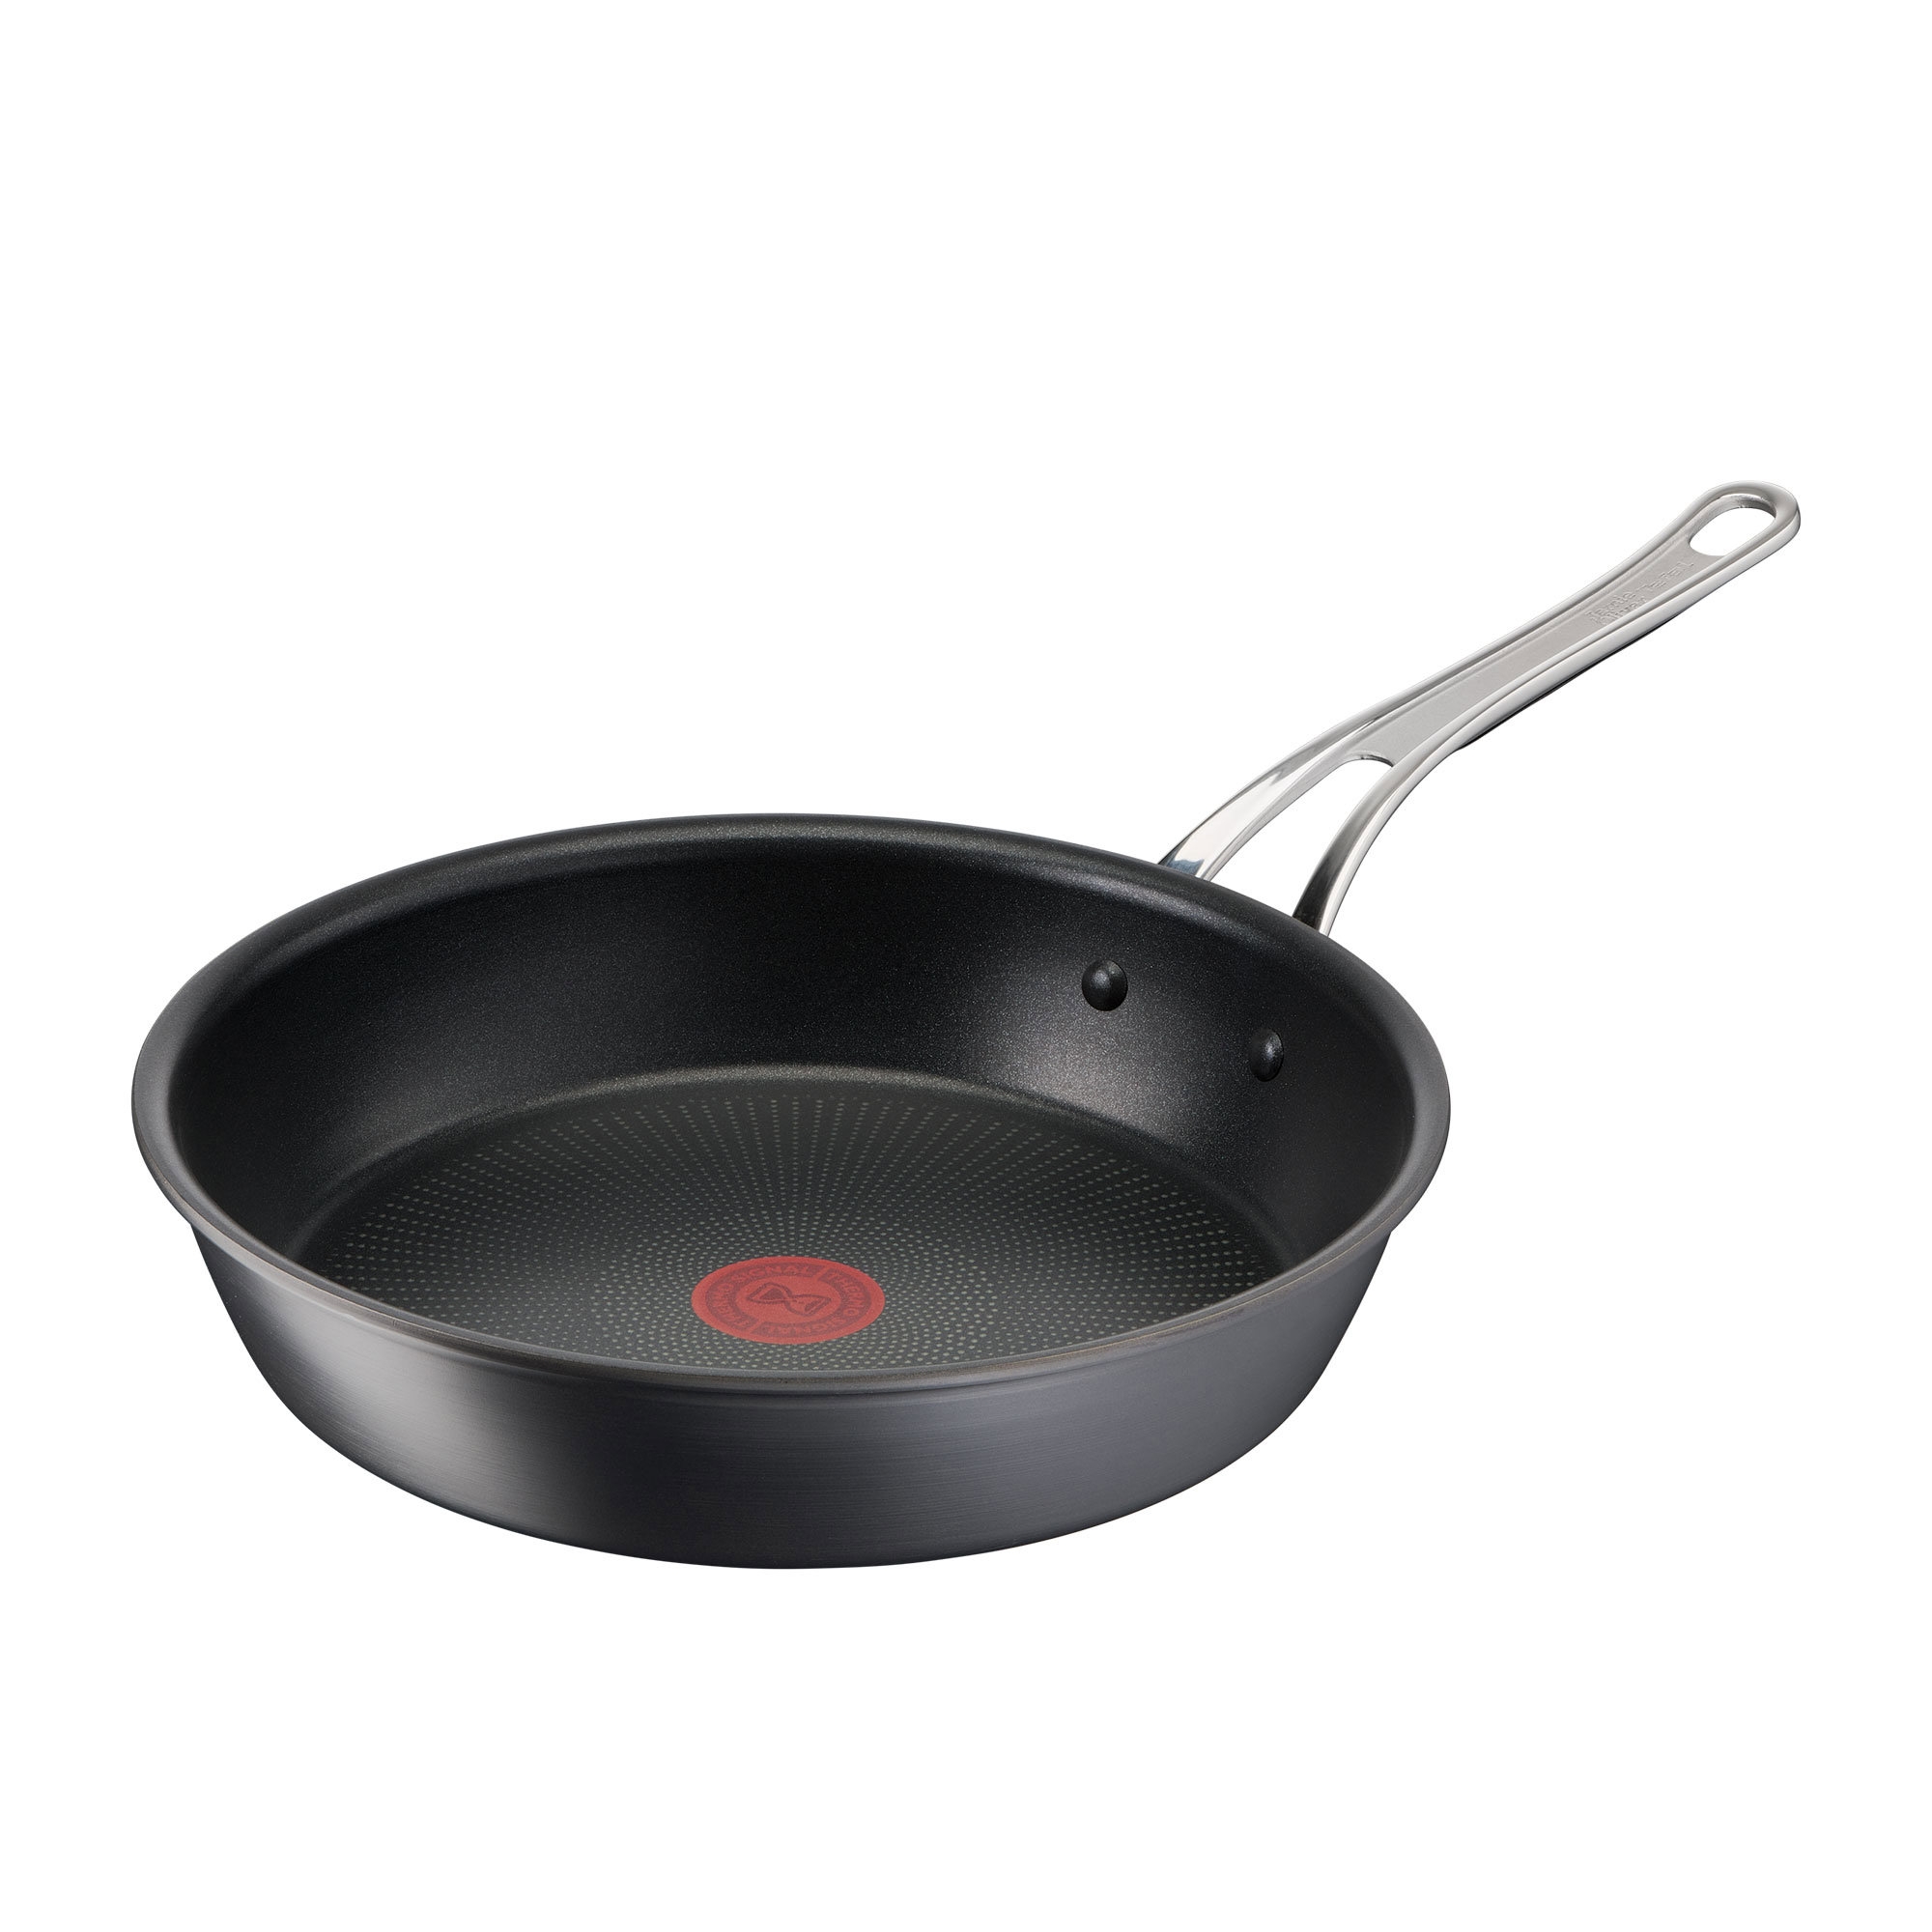 Jamie Oliver by Tefal Cook's Classic Hard Anodised Induction Frypan 30cm Image 1